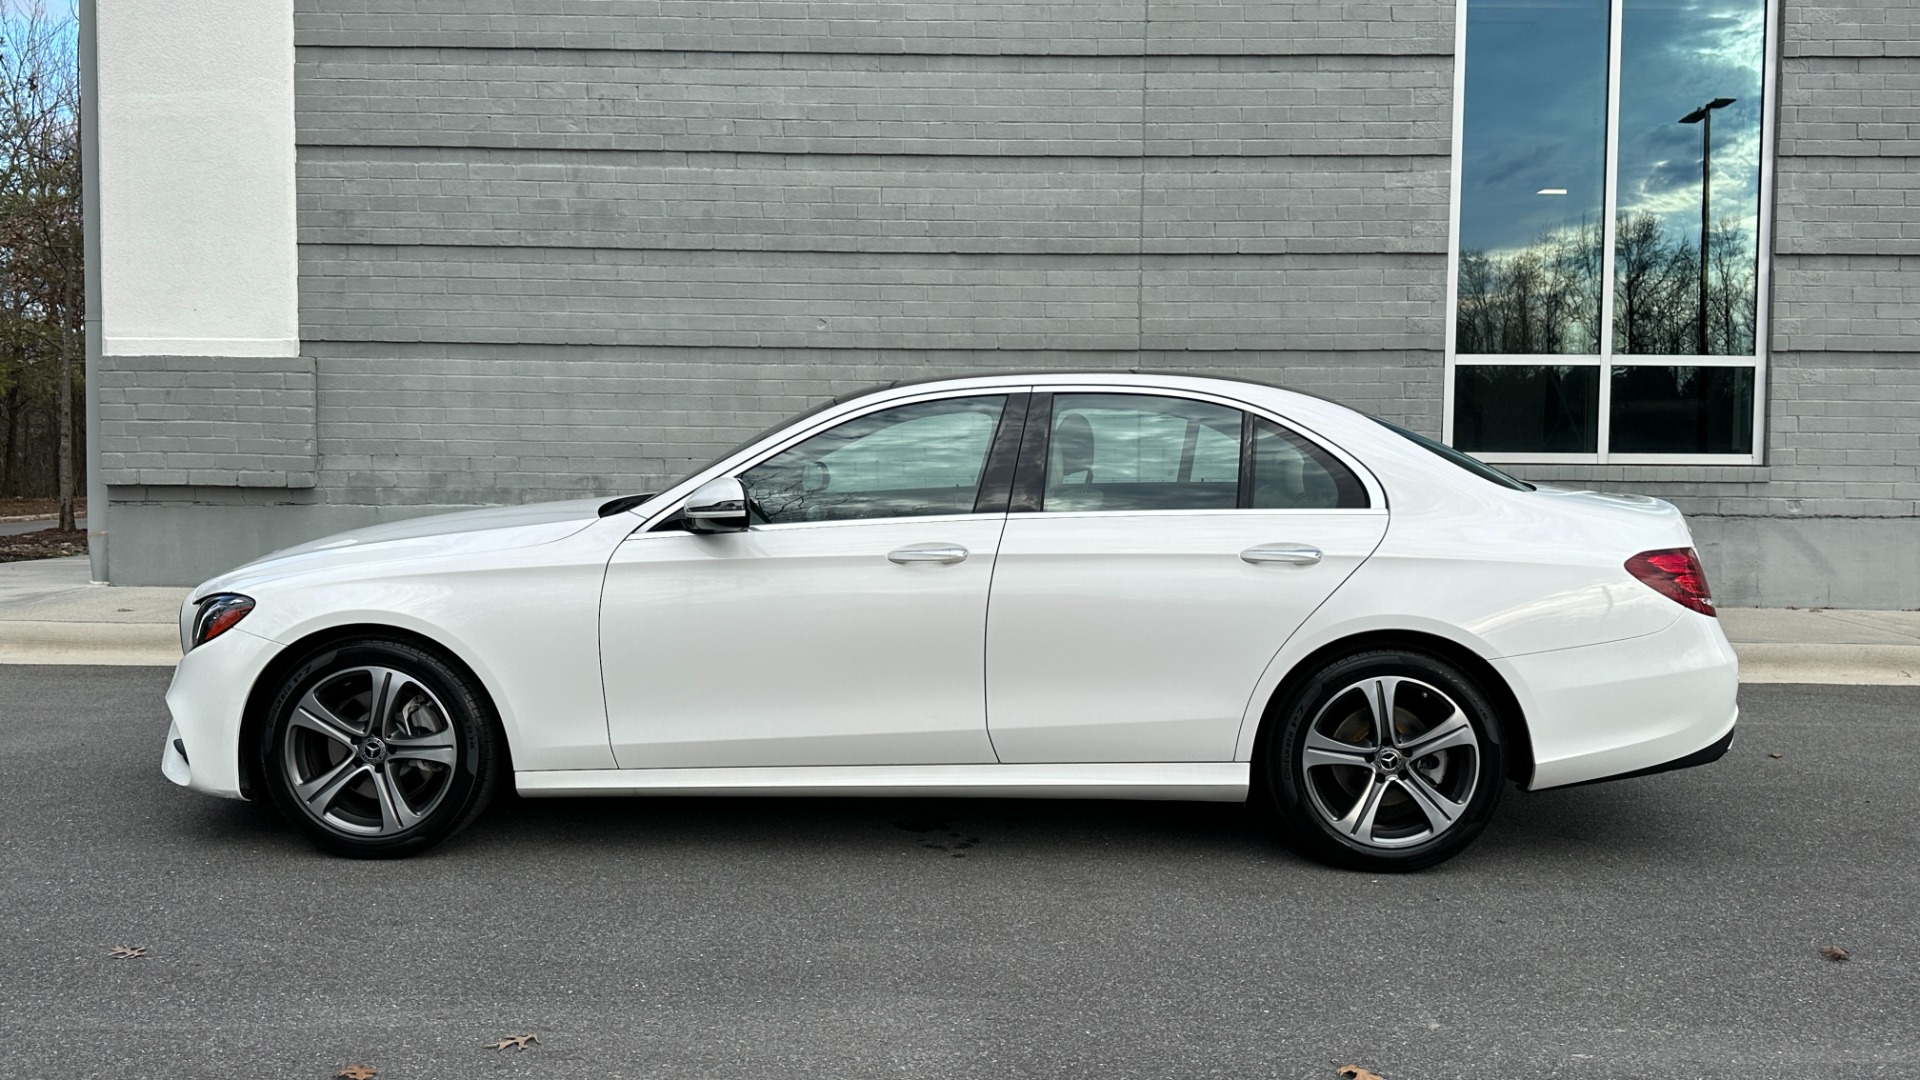 Used 2019 Mercedes-Benz E-Class E300 / PREMIUM PACKAGE / BLIND SPOT / BURMESTER SOUND / HEATED STEERING for sale $41,495 at Formula Imports in Charlotte NC 28227 6